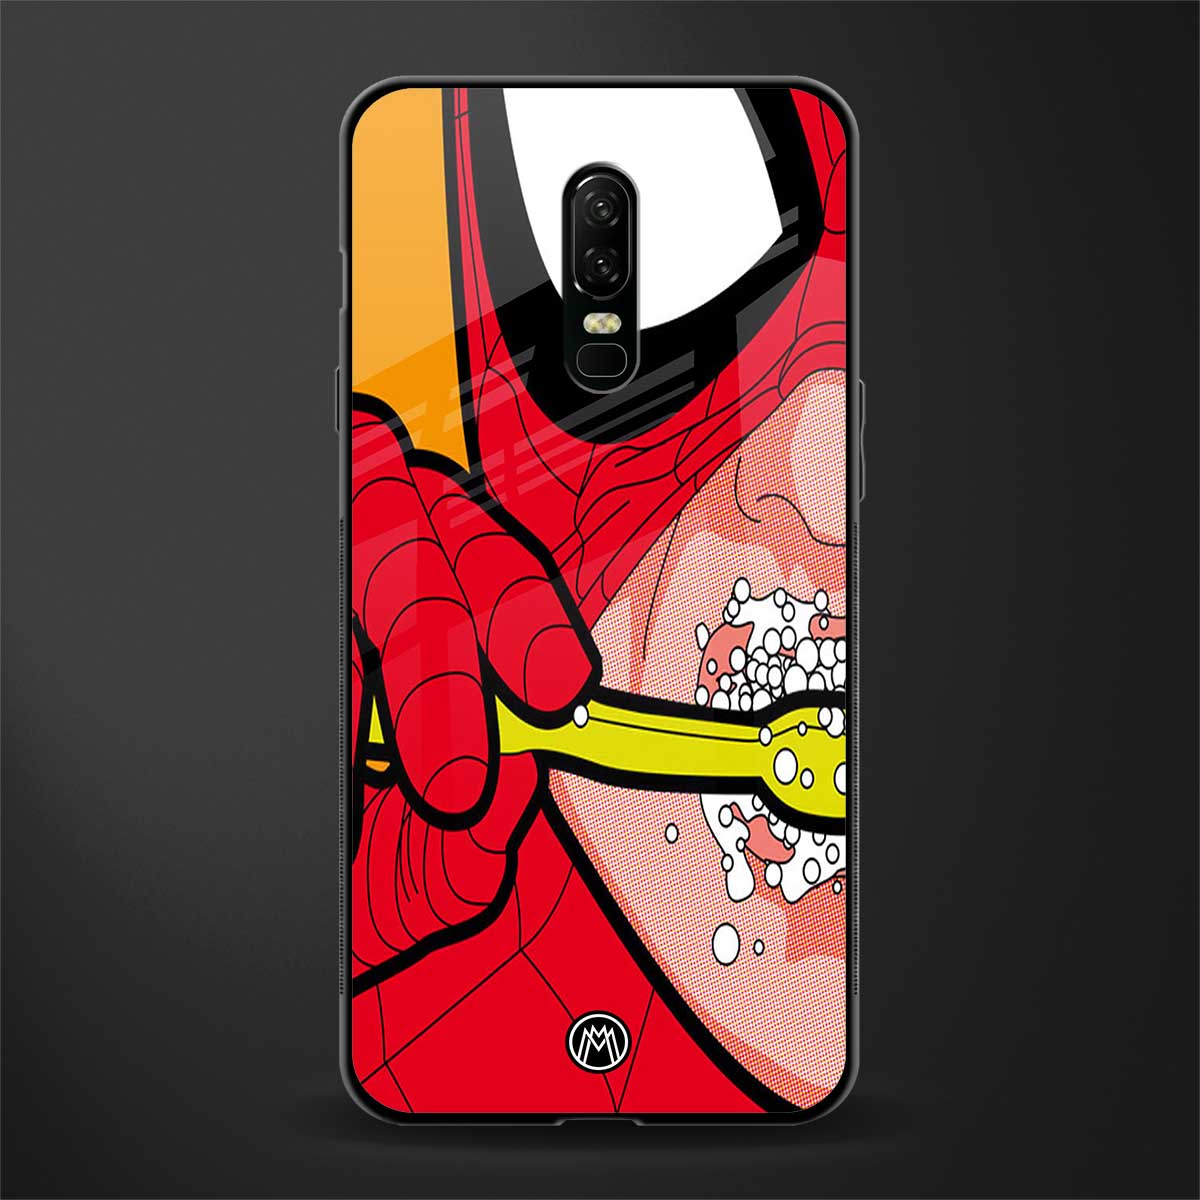 brushing spiderman glass case for oneplus 6 image